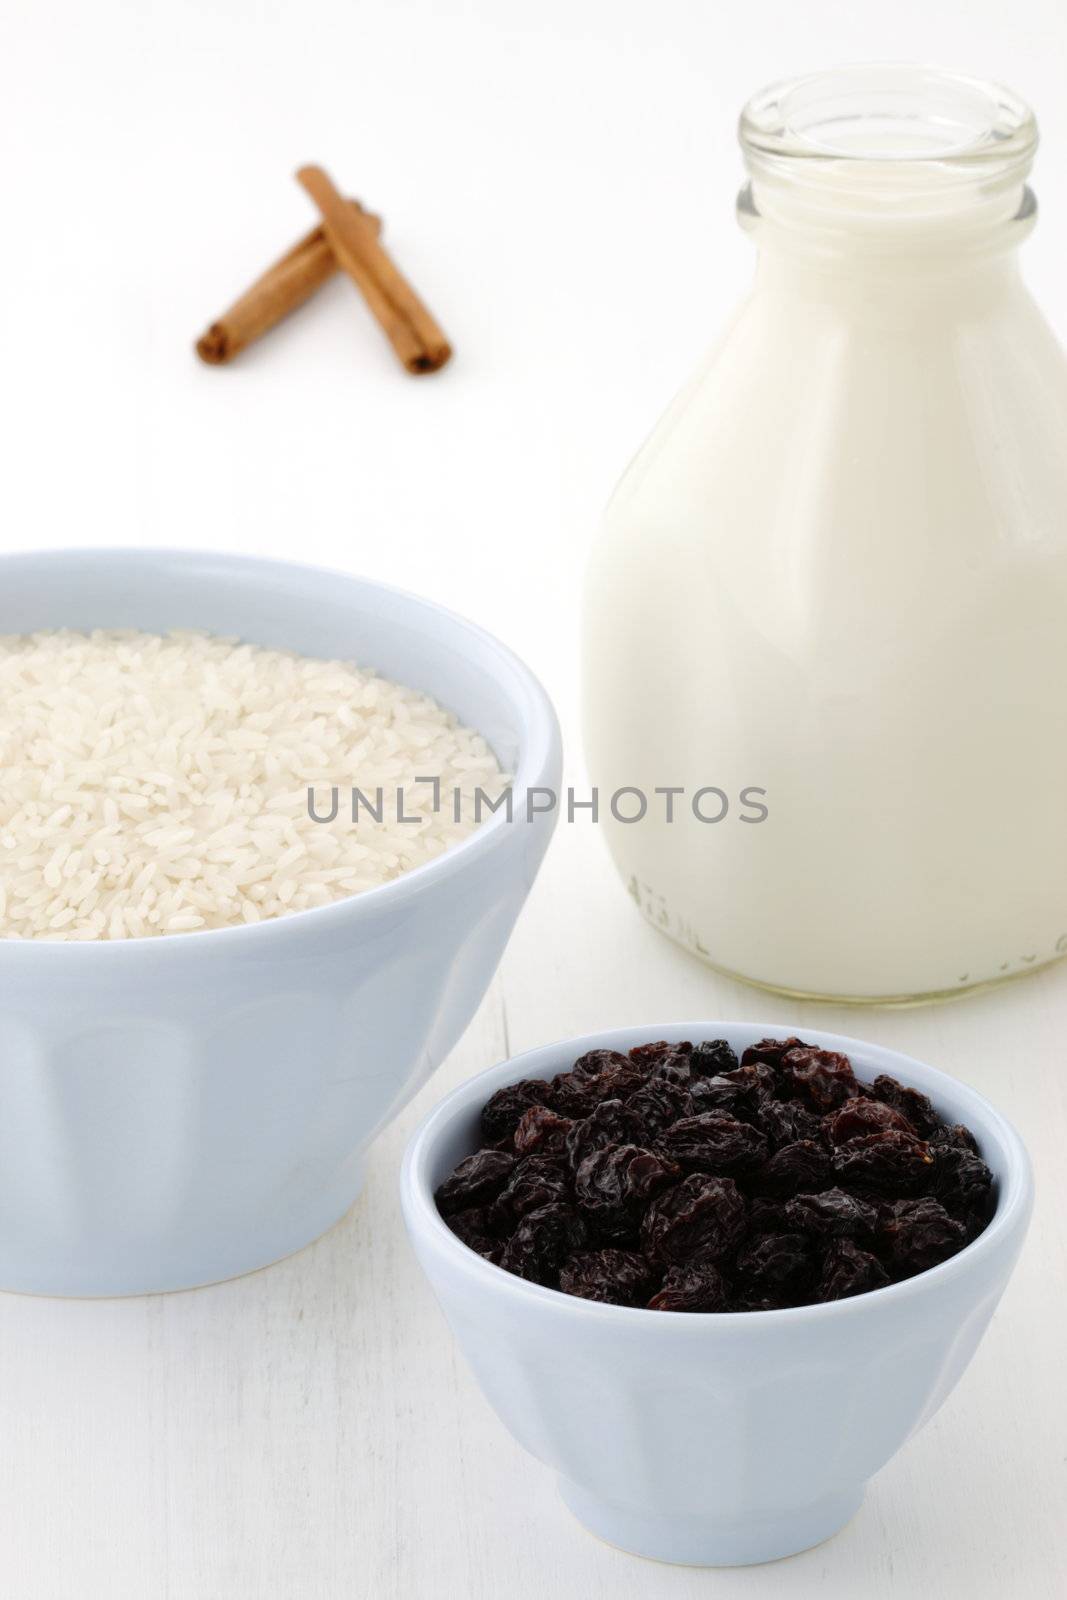 Rice pudding ingredients by tacar